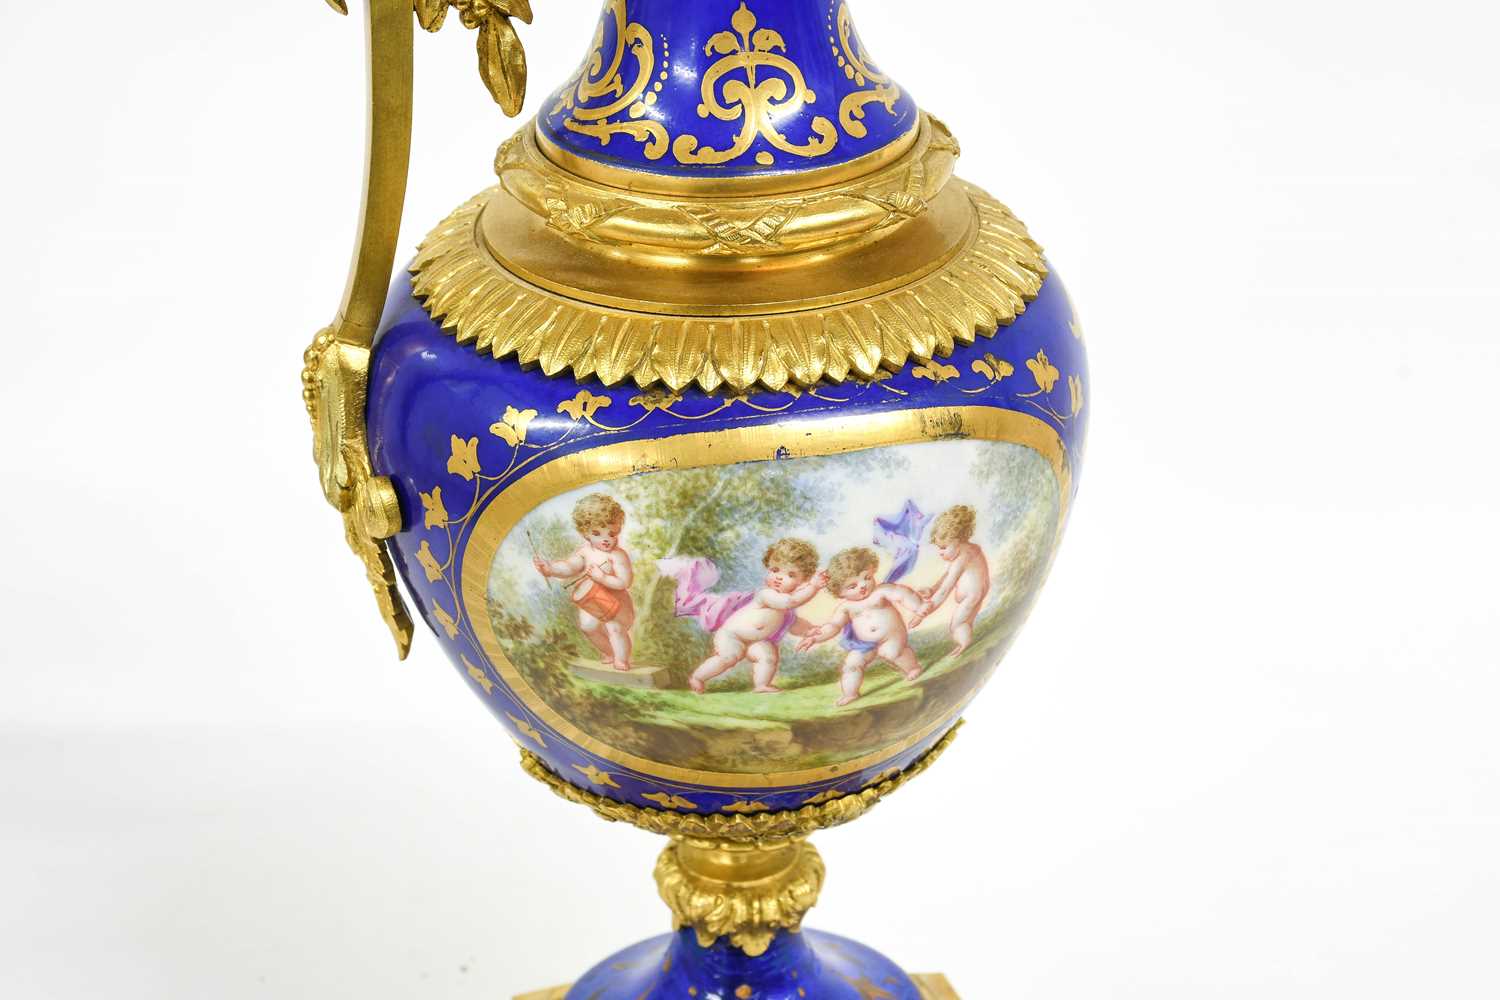 A Sèvres Style Porcelain and Gilt Metal Mounted Ewer, early 20th century, blue ground, with tooled - Image 2 of 2